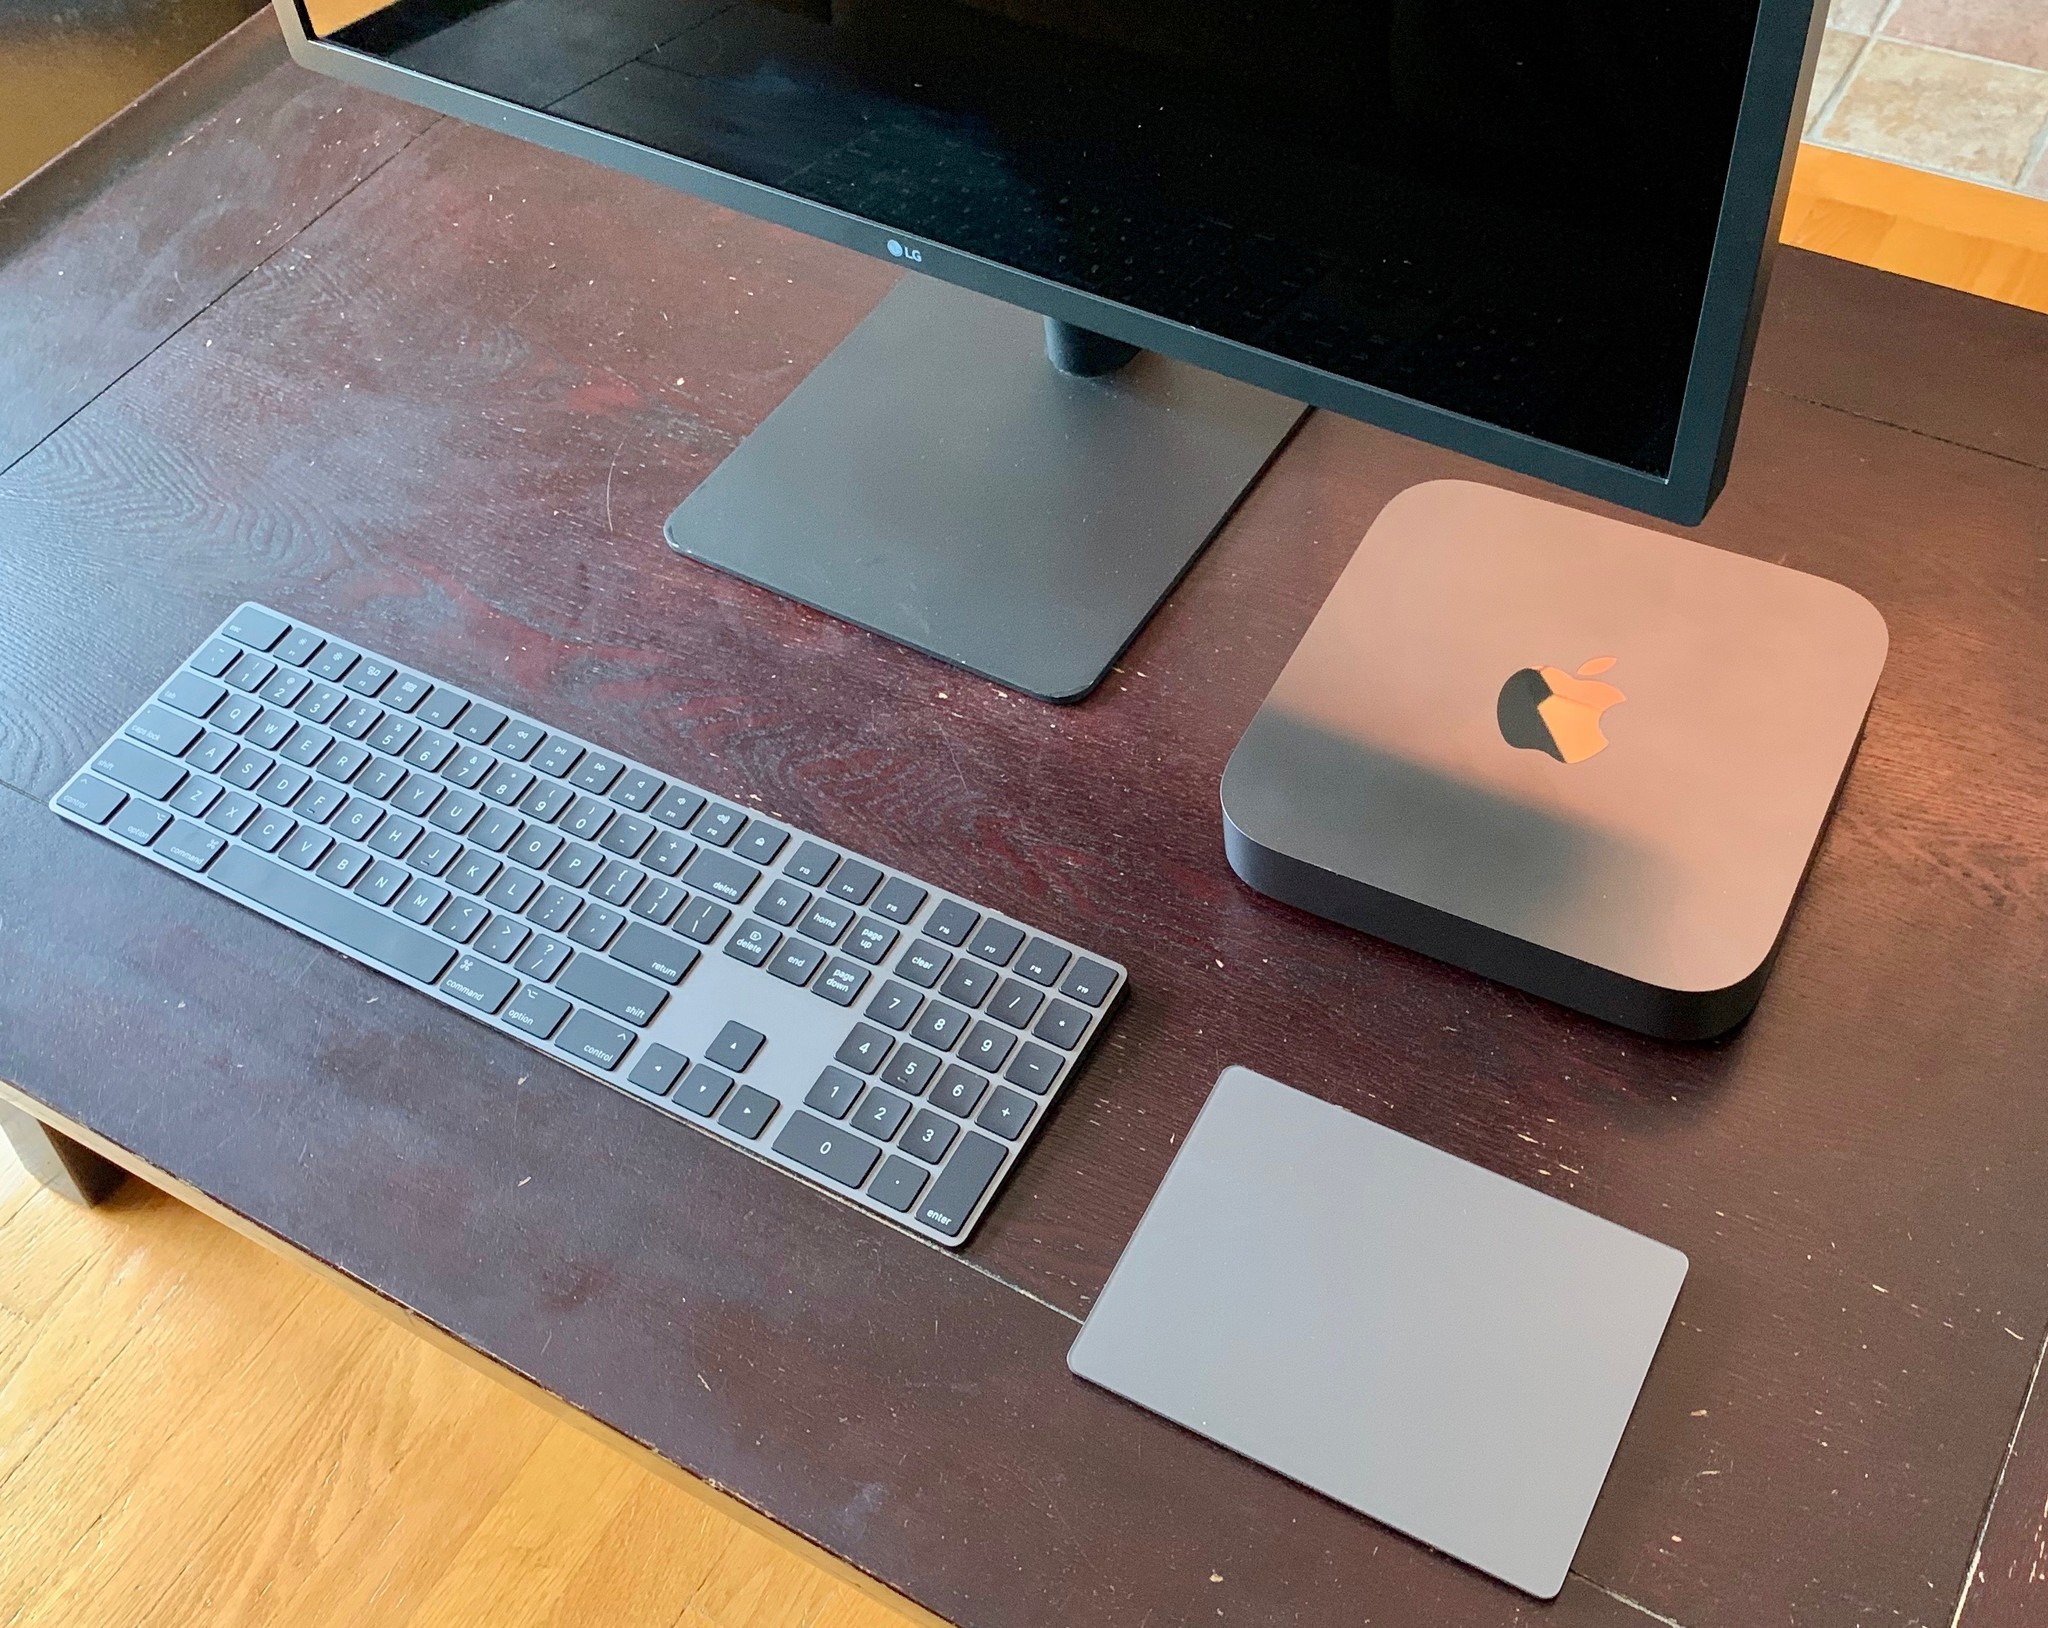 Set up your Mac mini - Apple Support